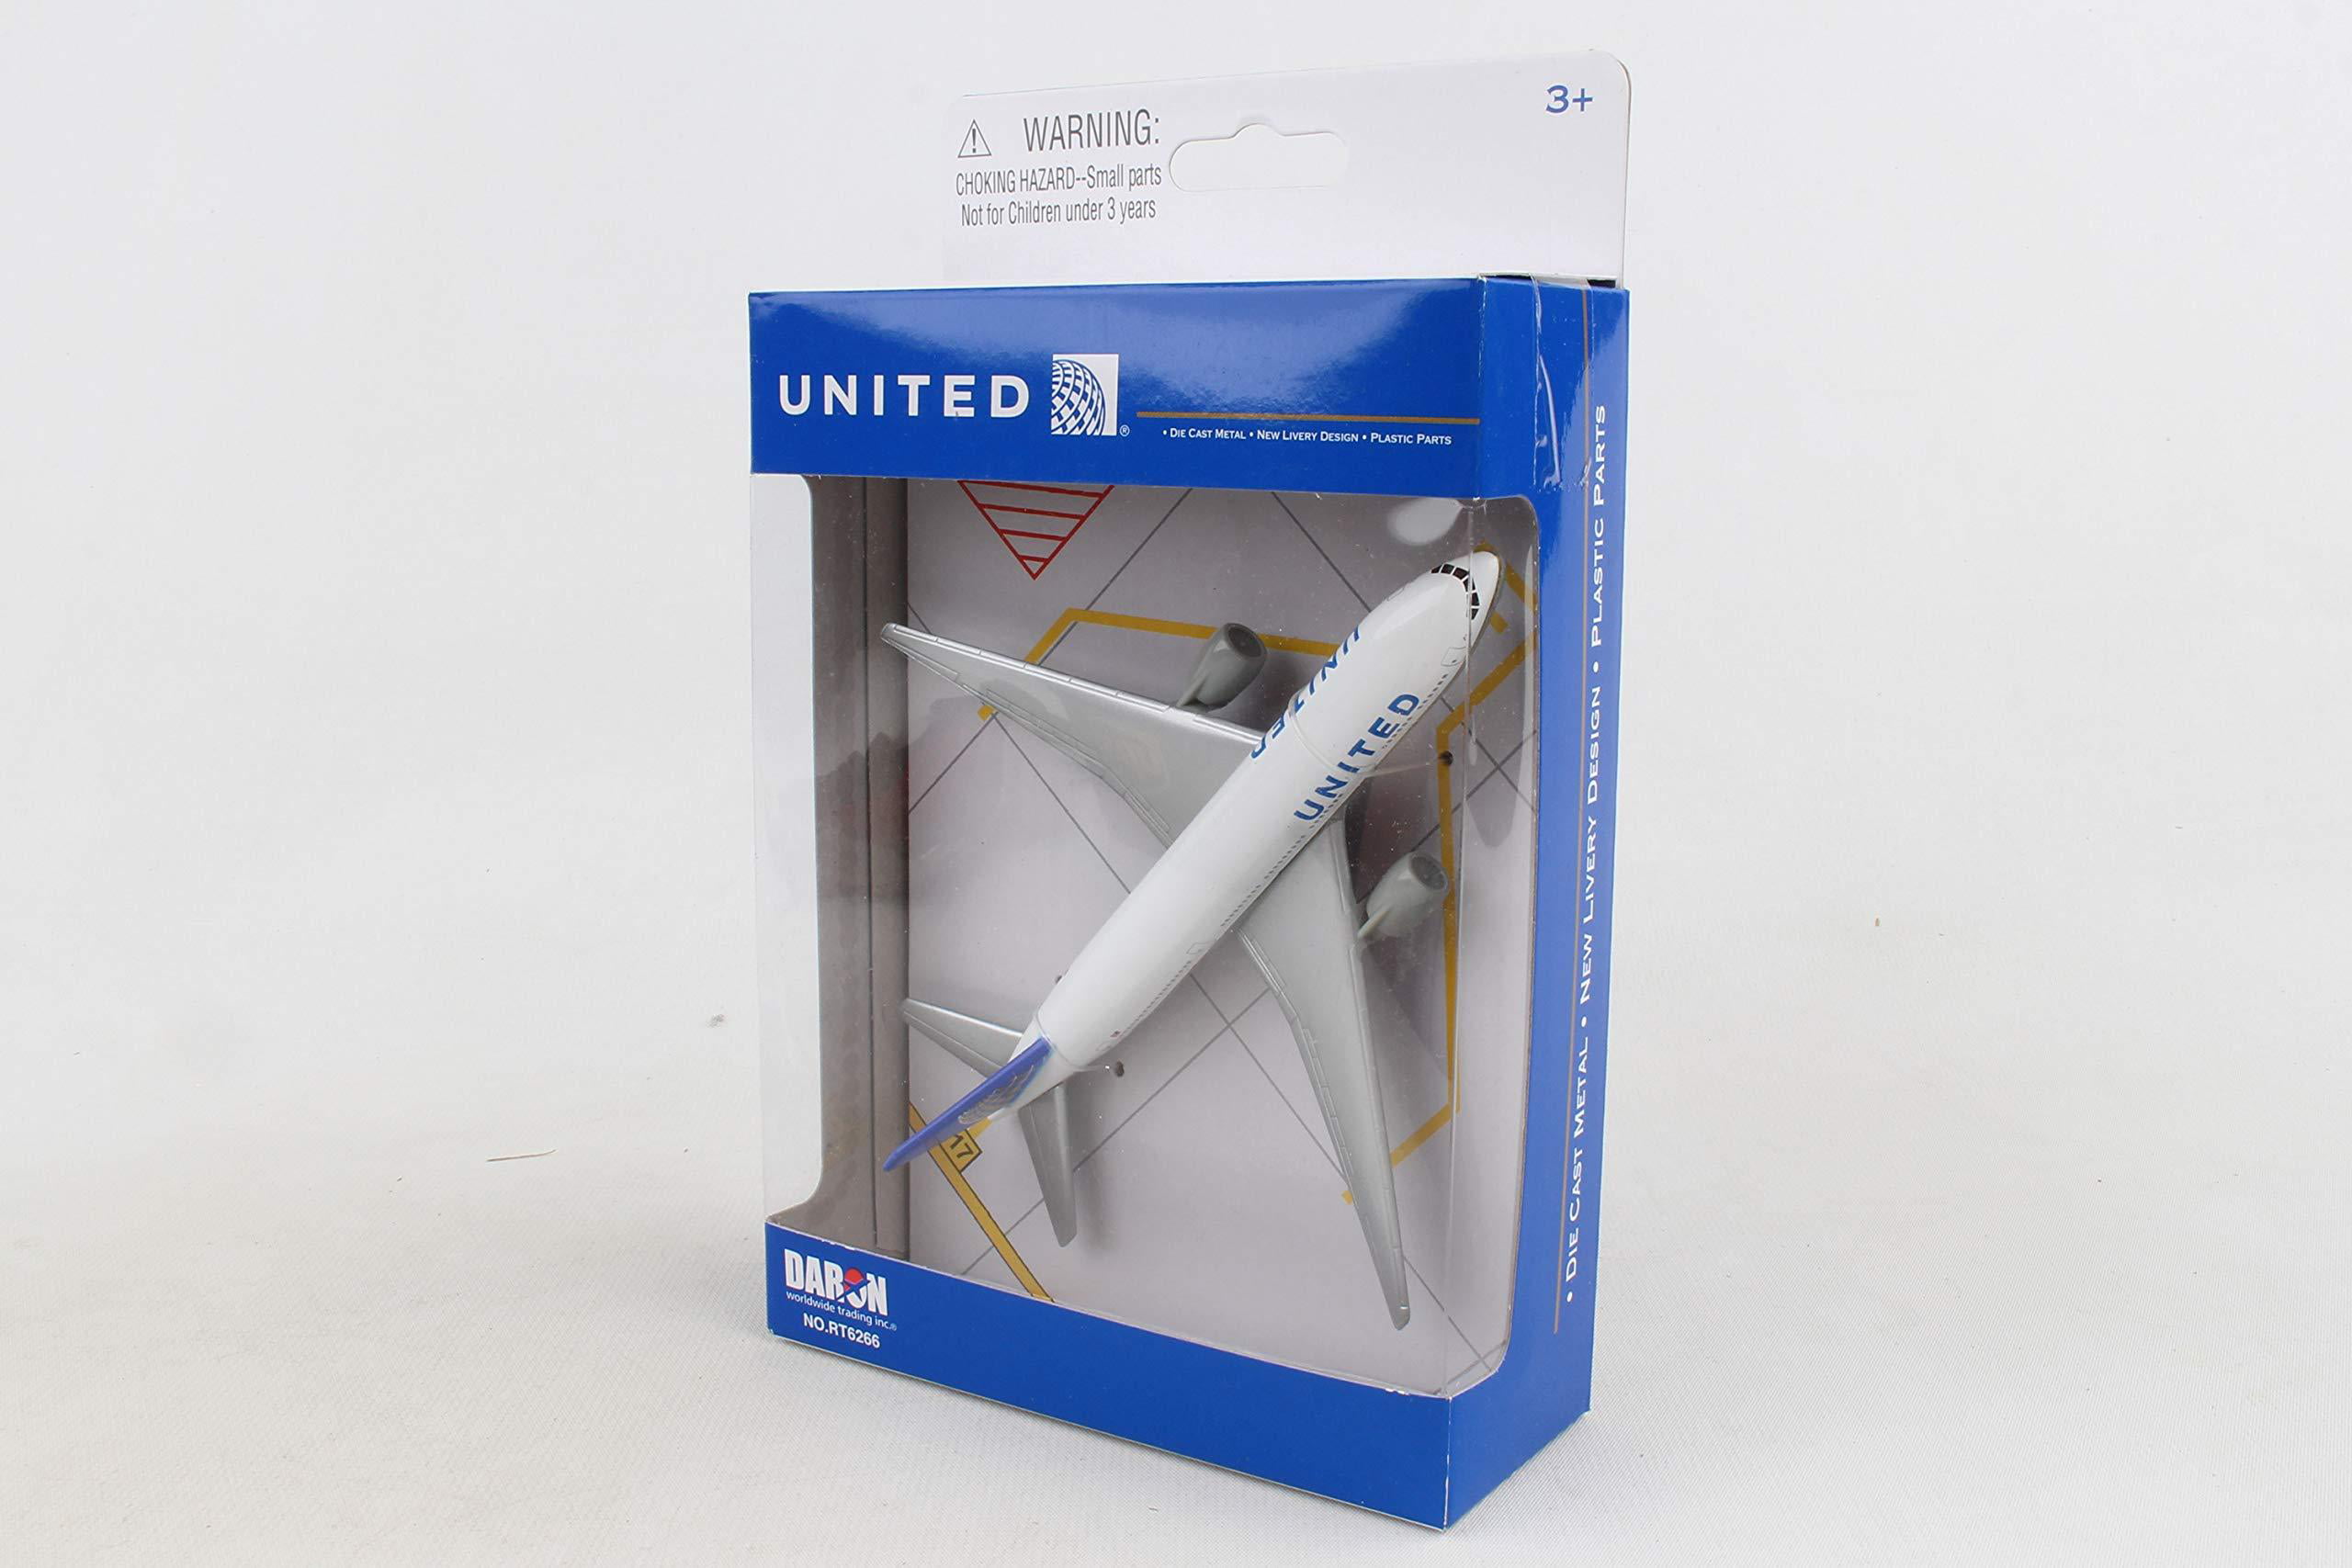 United Airlines 777 airplane toy plane RT6266 